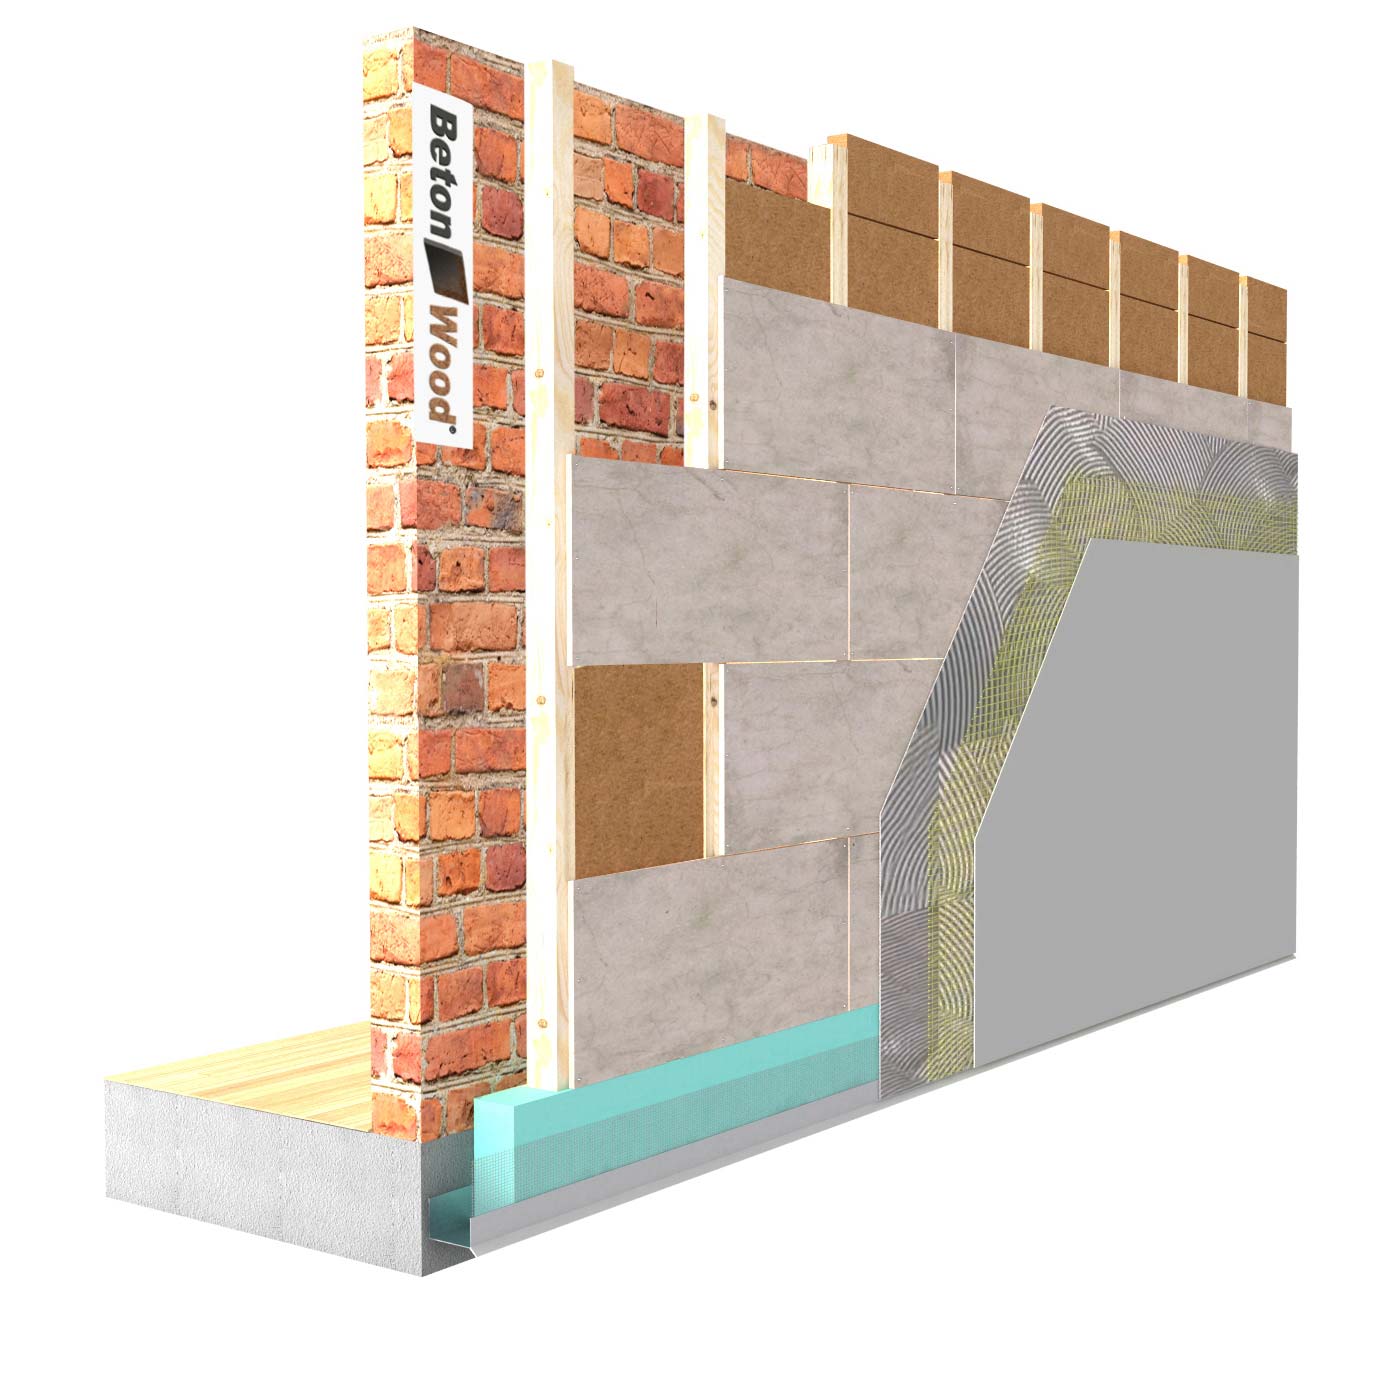 External insulation system with Protect fiber wood on masonry